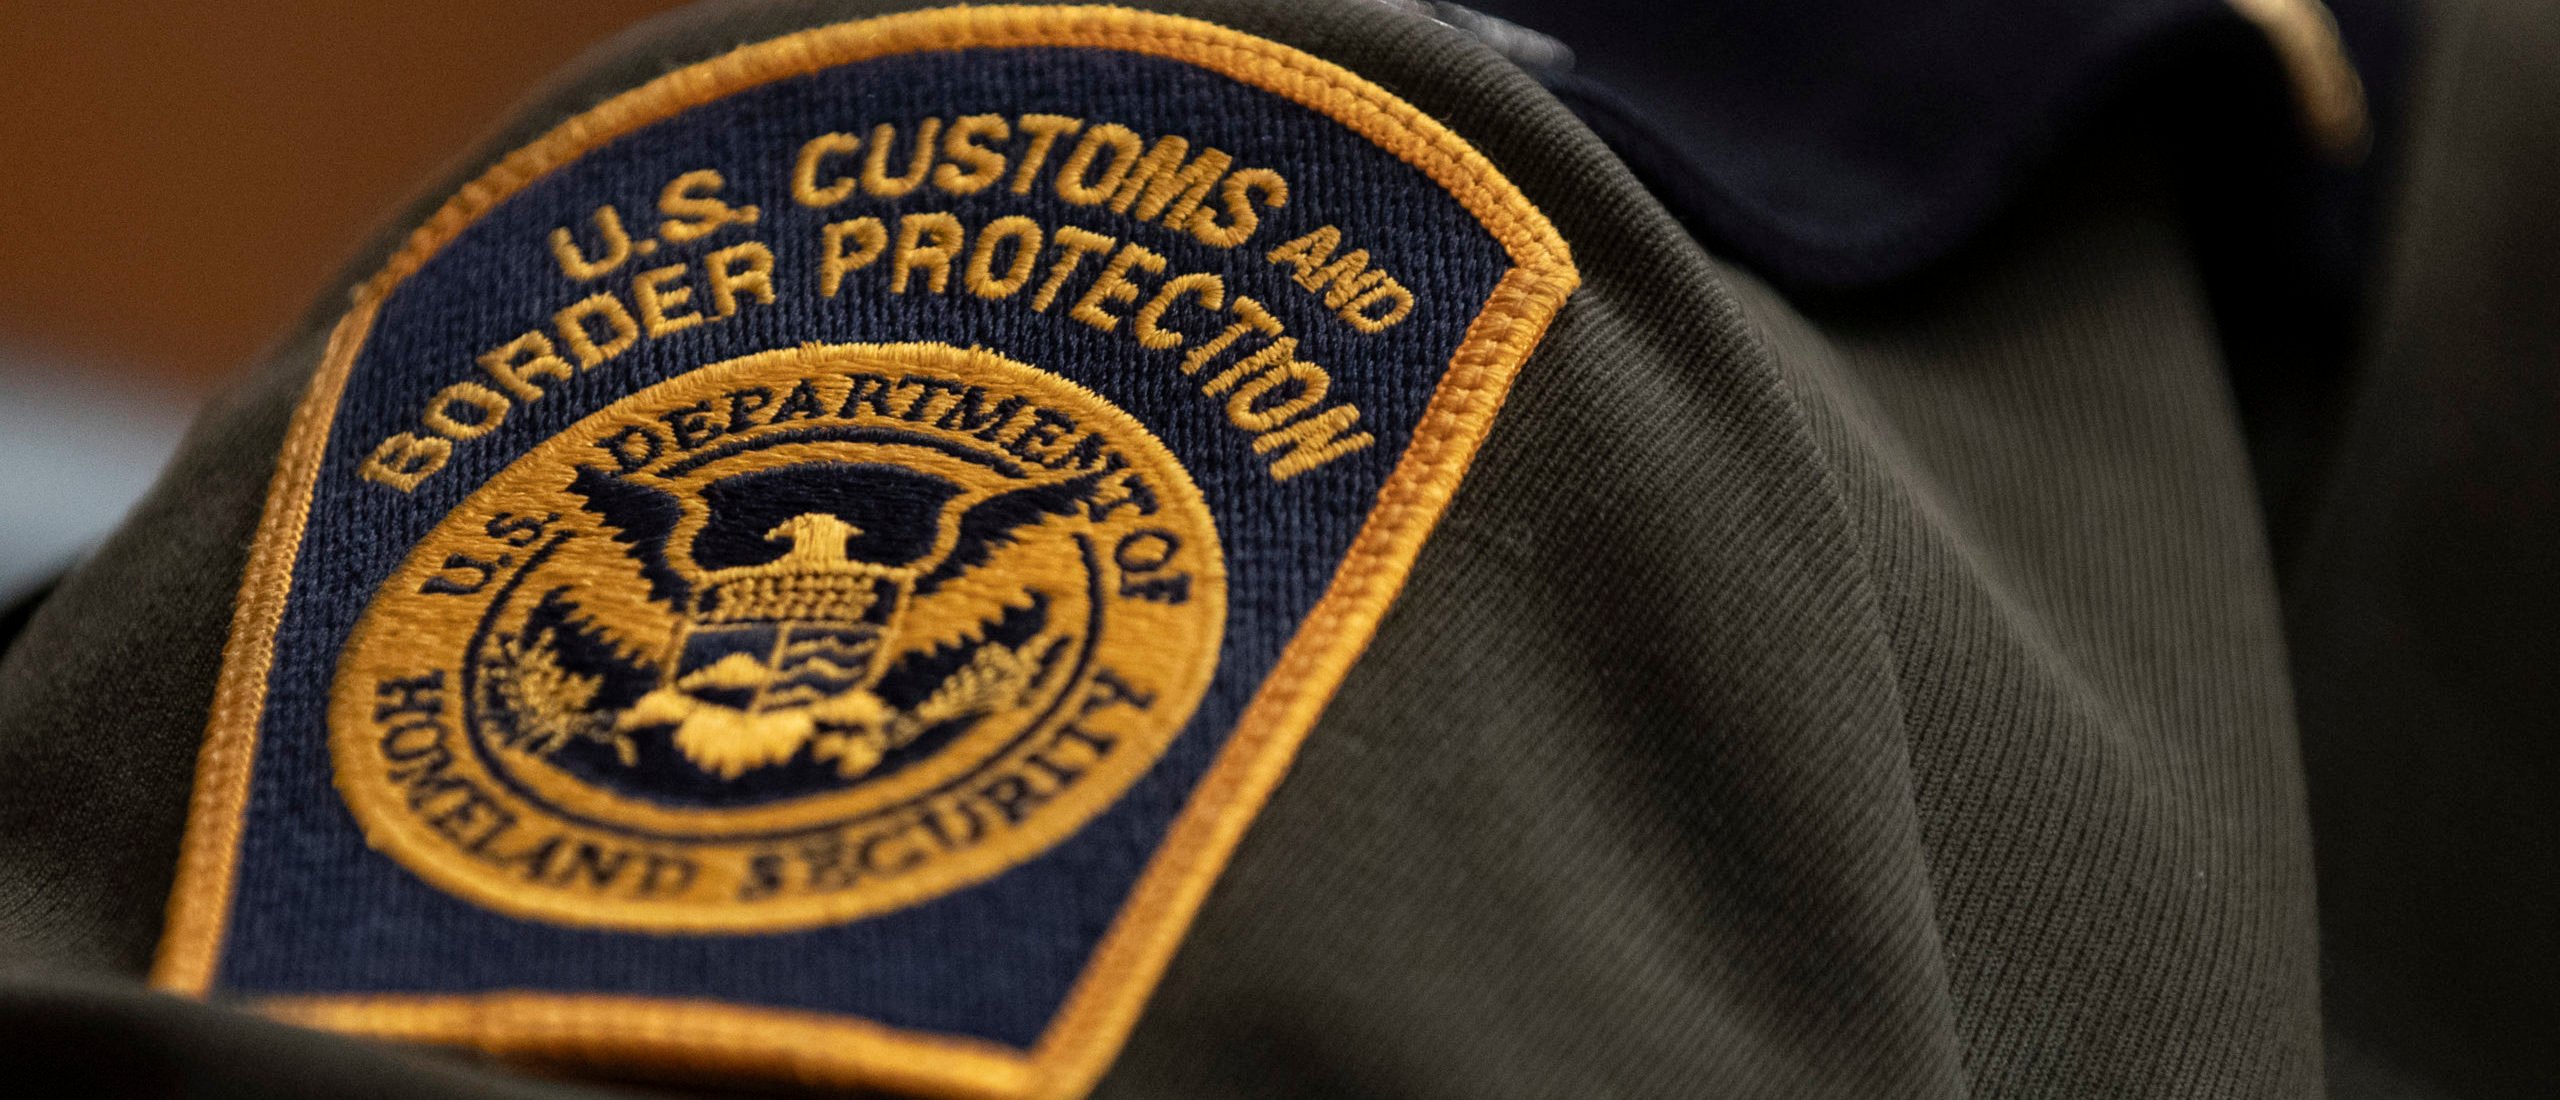 WASHINGTON, DC - APRIL 09: A U.S. Customs and Border Protection patch on the uniform of Rodolfo Karisch, Rio Grande Valley sector chief patrol agent for the U.S. Border Patrol, as he testifies during a U.S. Senate Homeland Security Committee hearing on migration on the Southern U.S Border on April 9, 2019 in Washington, DC. During the hearing, lawmakers questioned witnesses about child mentions, minor reunification, and illegal drug seizures on the Southern Border. (Photo by Alex Edelman/Getty Images)